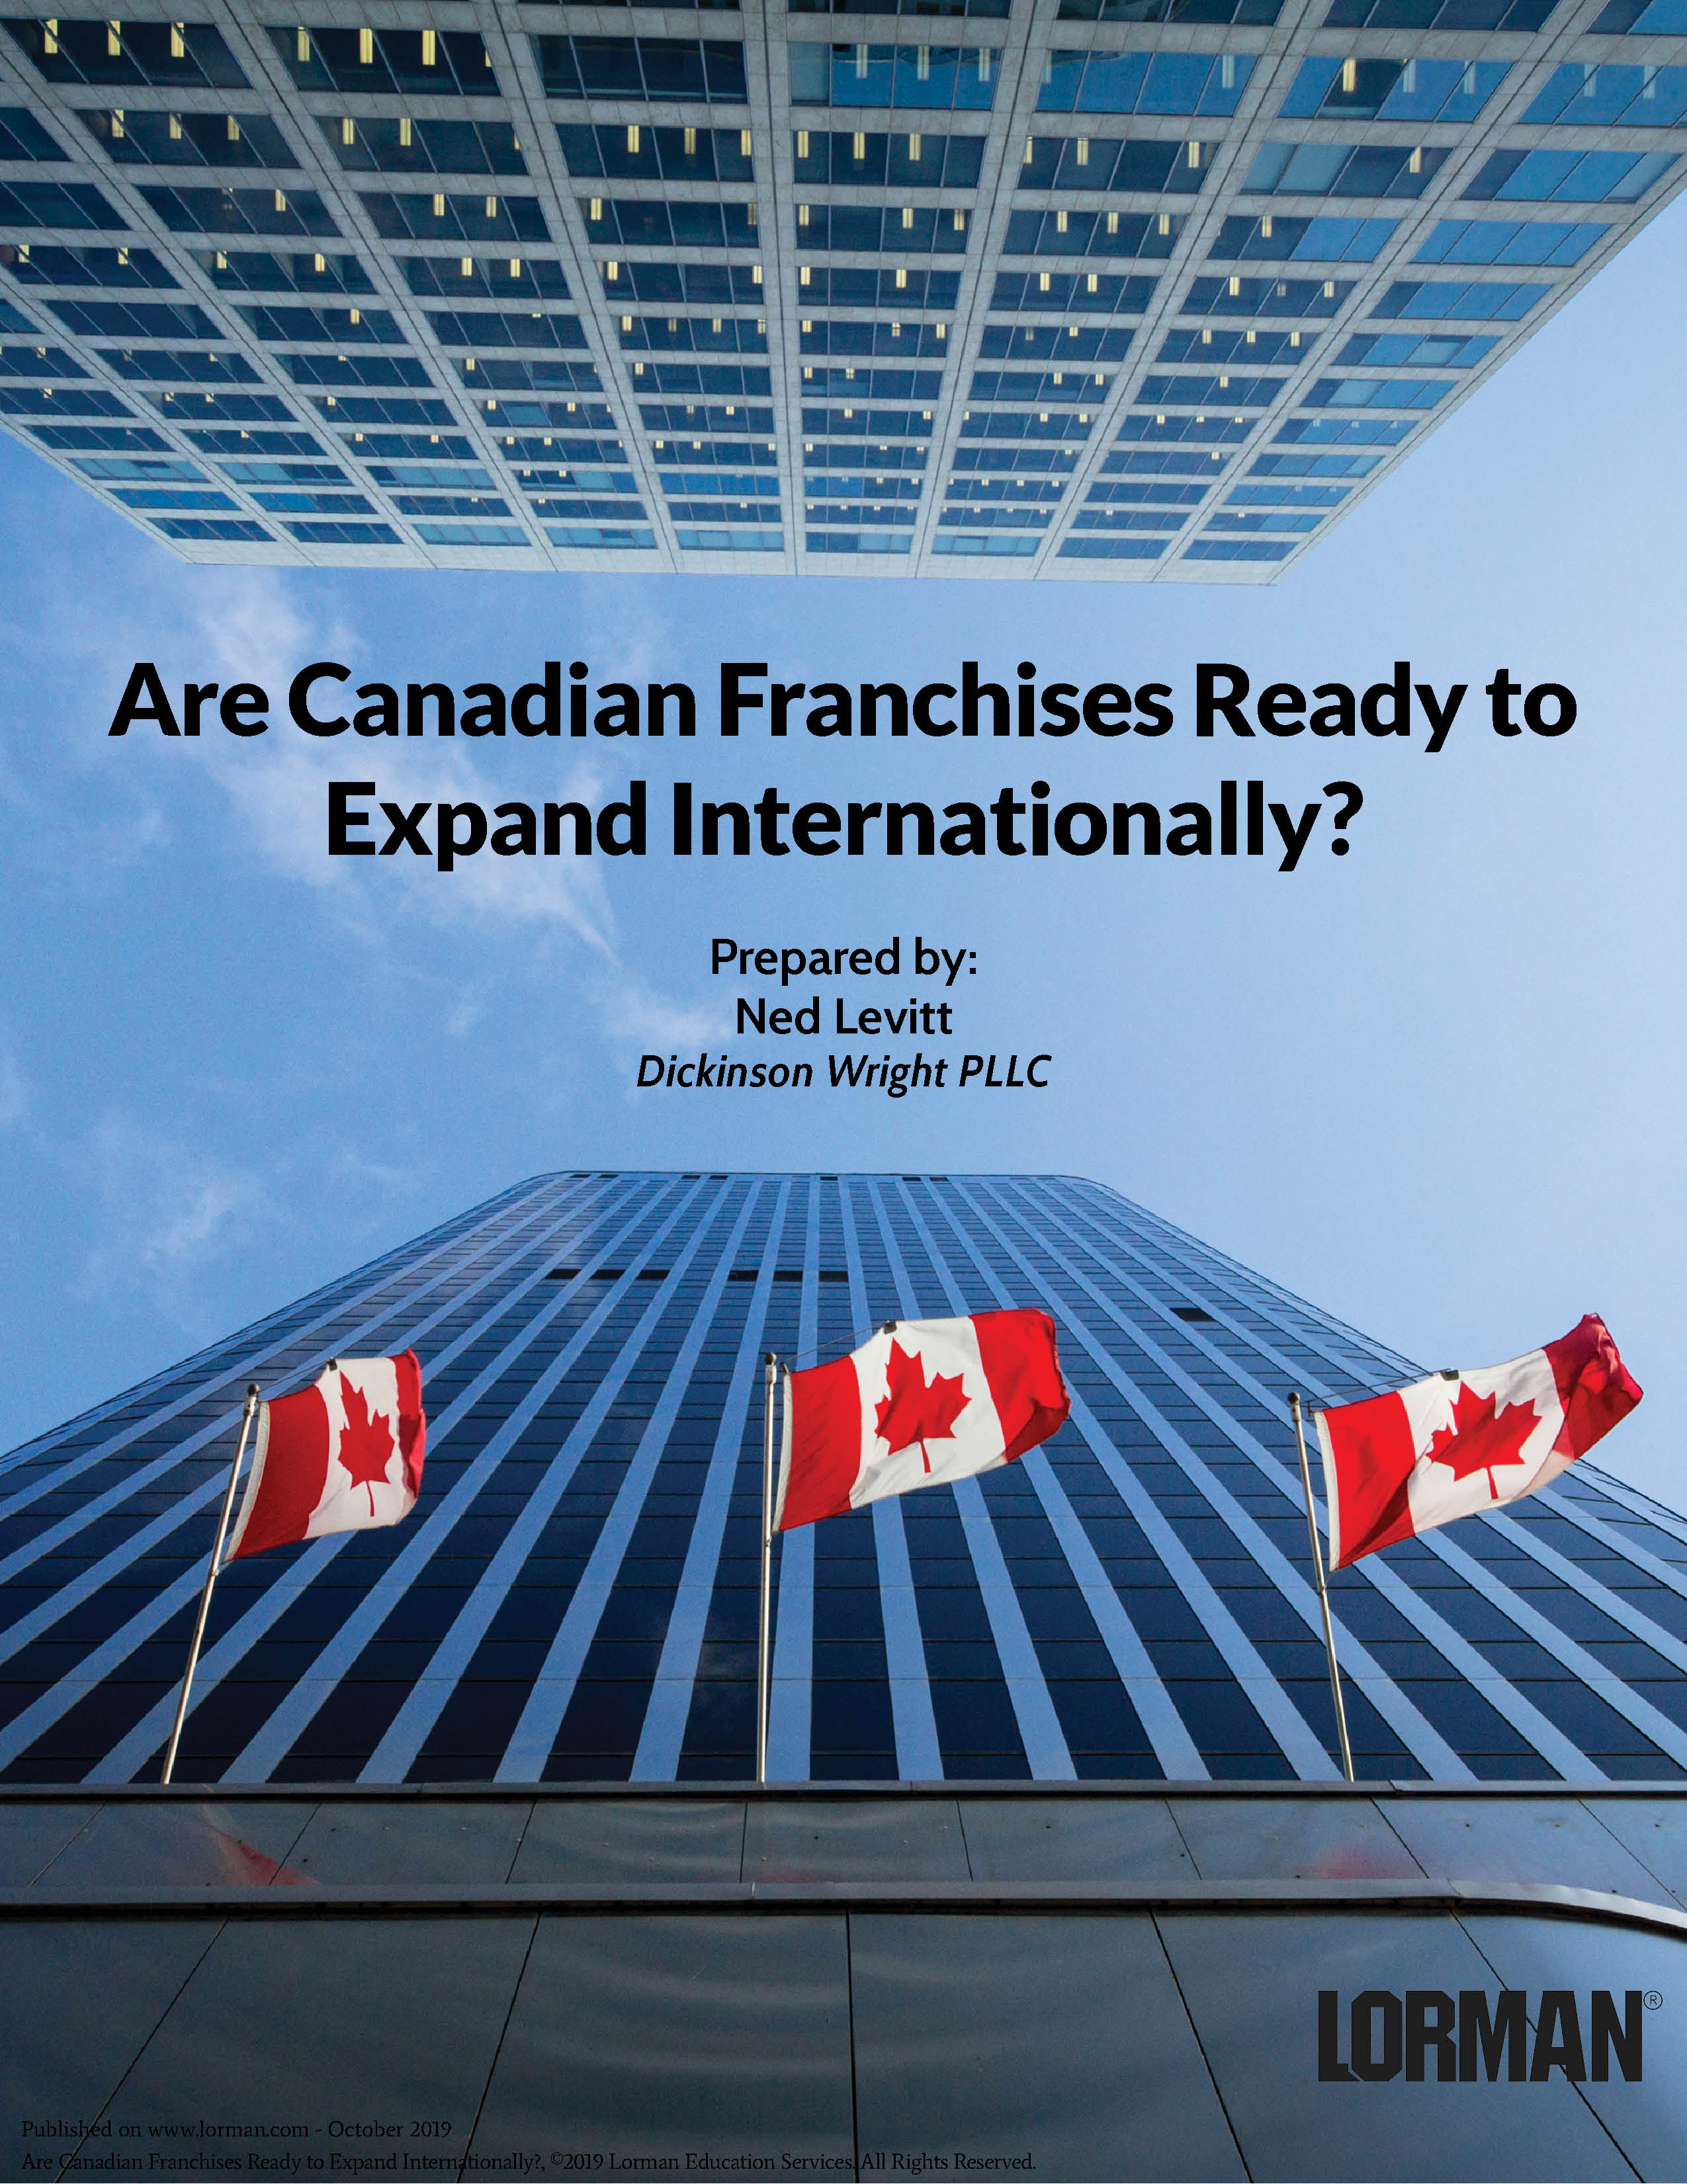 Are Canadian Franchises Ready to Expand Internationally?